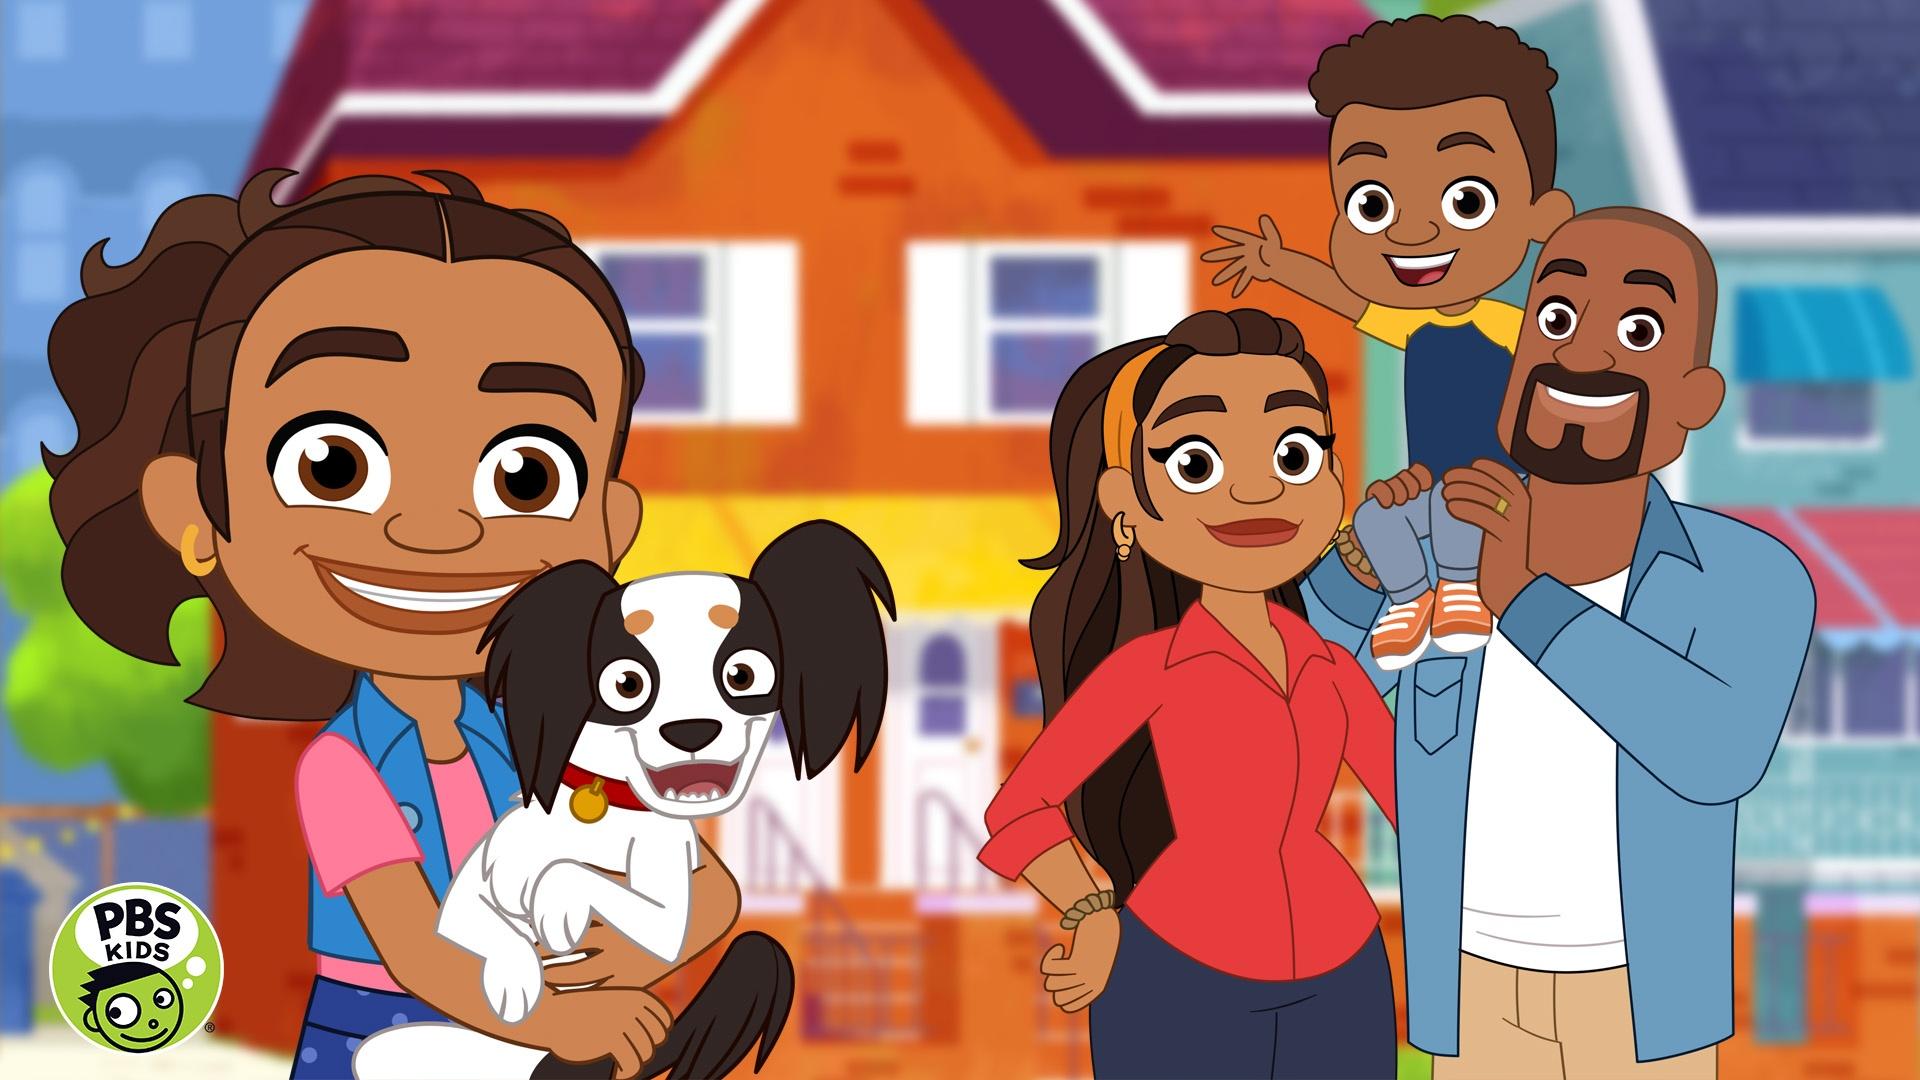 PBS KIDS Announces ALMA'S WAY, Series from Fred Rogers Productions Created by TV Icon Sonia Manzano